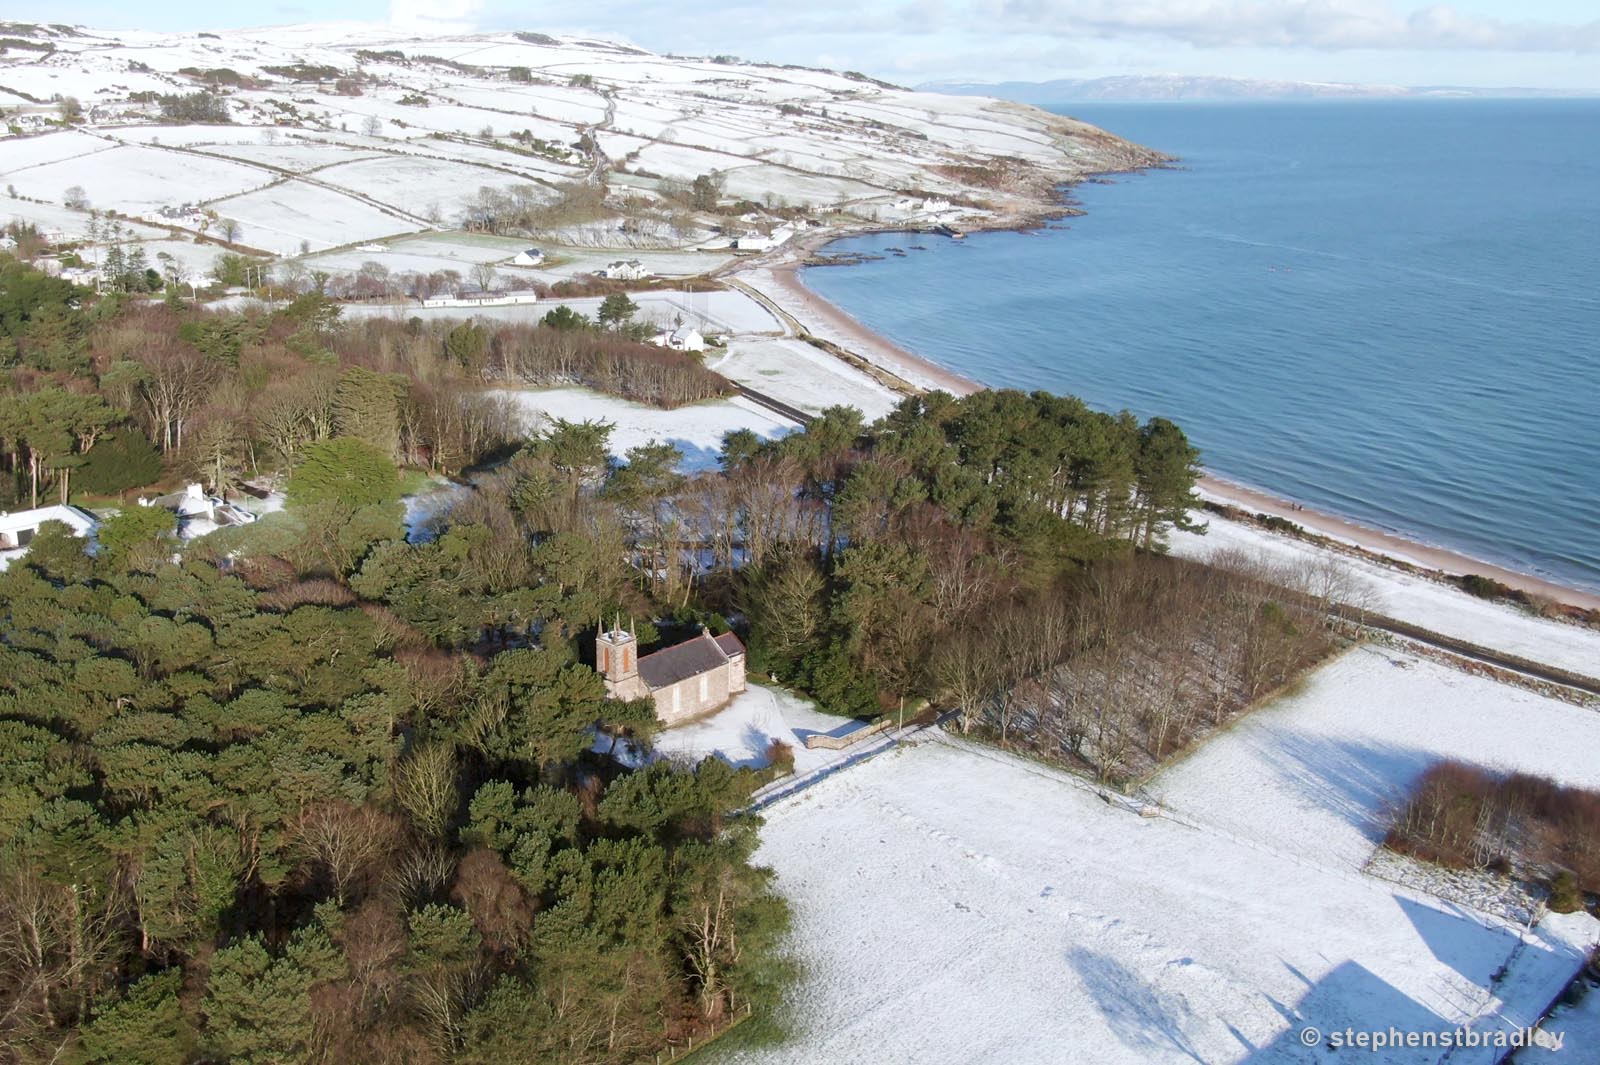 Aerial drone photography and video production services Dublin and Ireland portfolio - Cushendun village under snow in winter, video screenshot 2